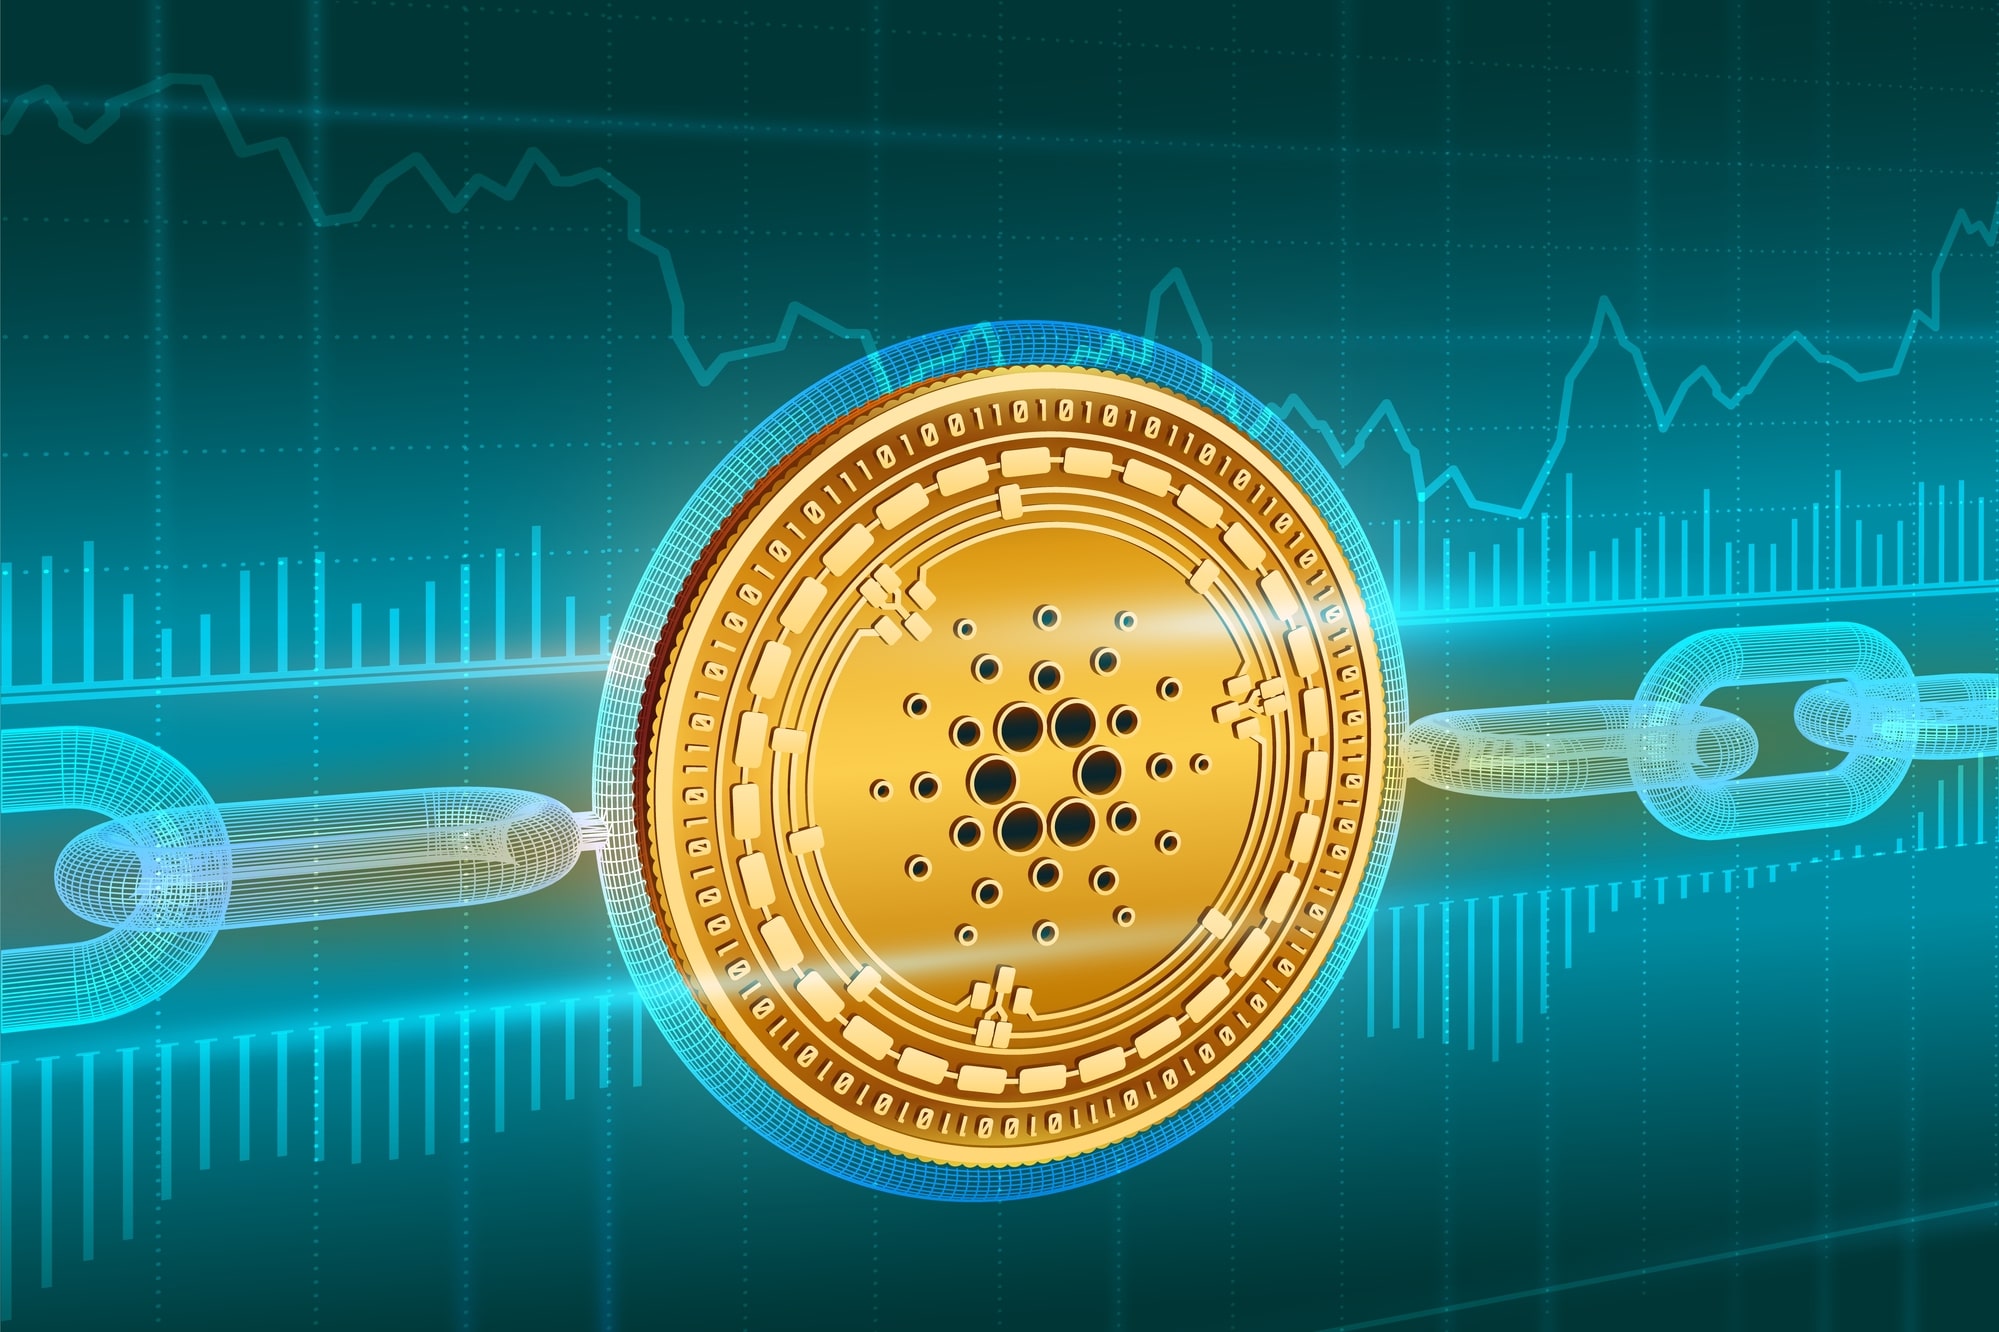 Cardano will soon have a new DeFi stablecoin with COTI